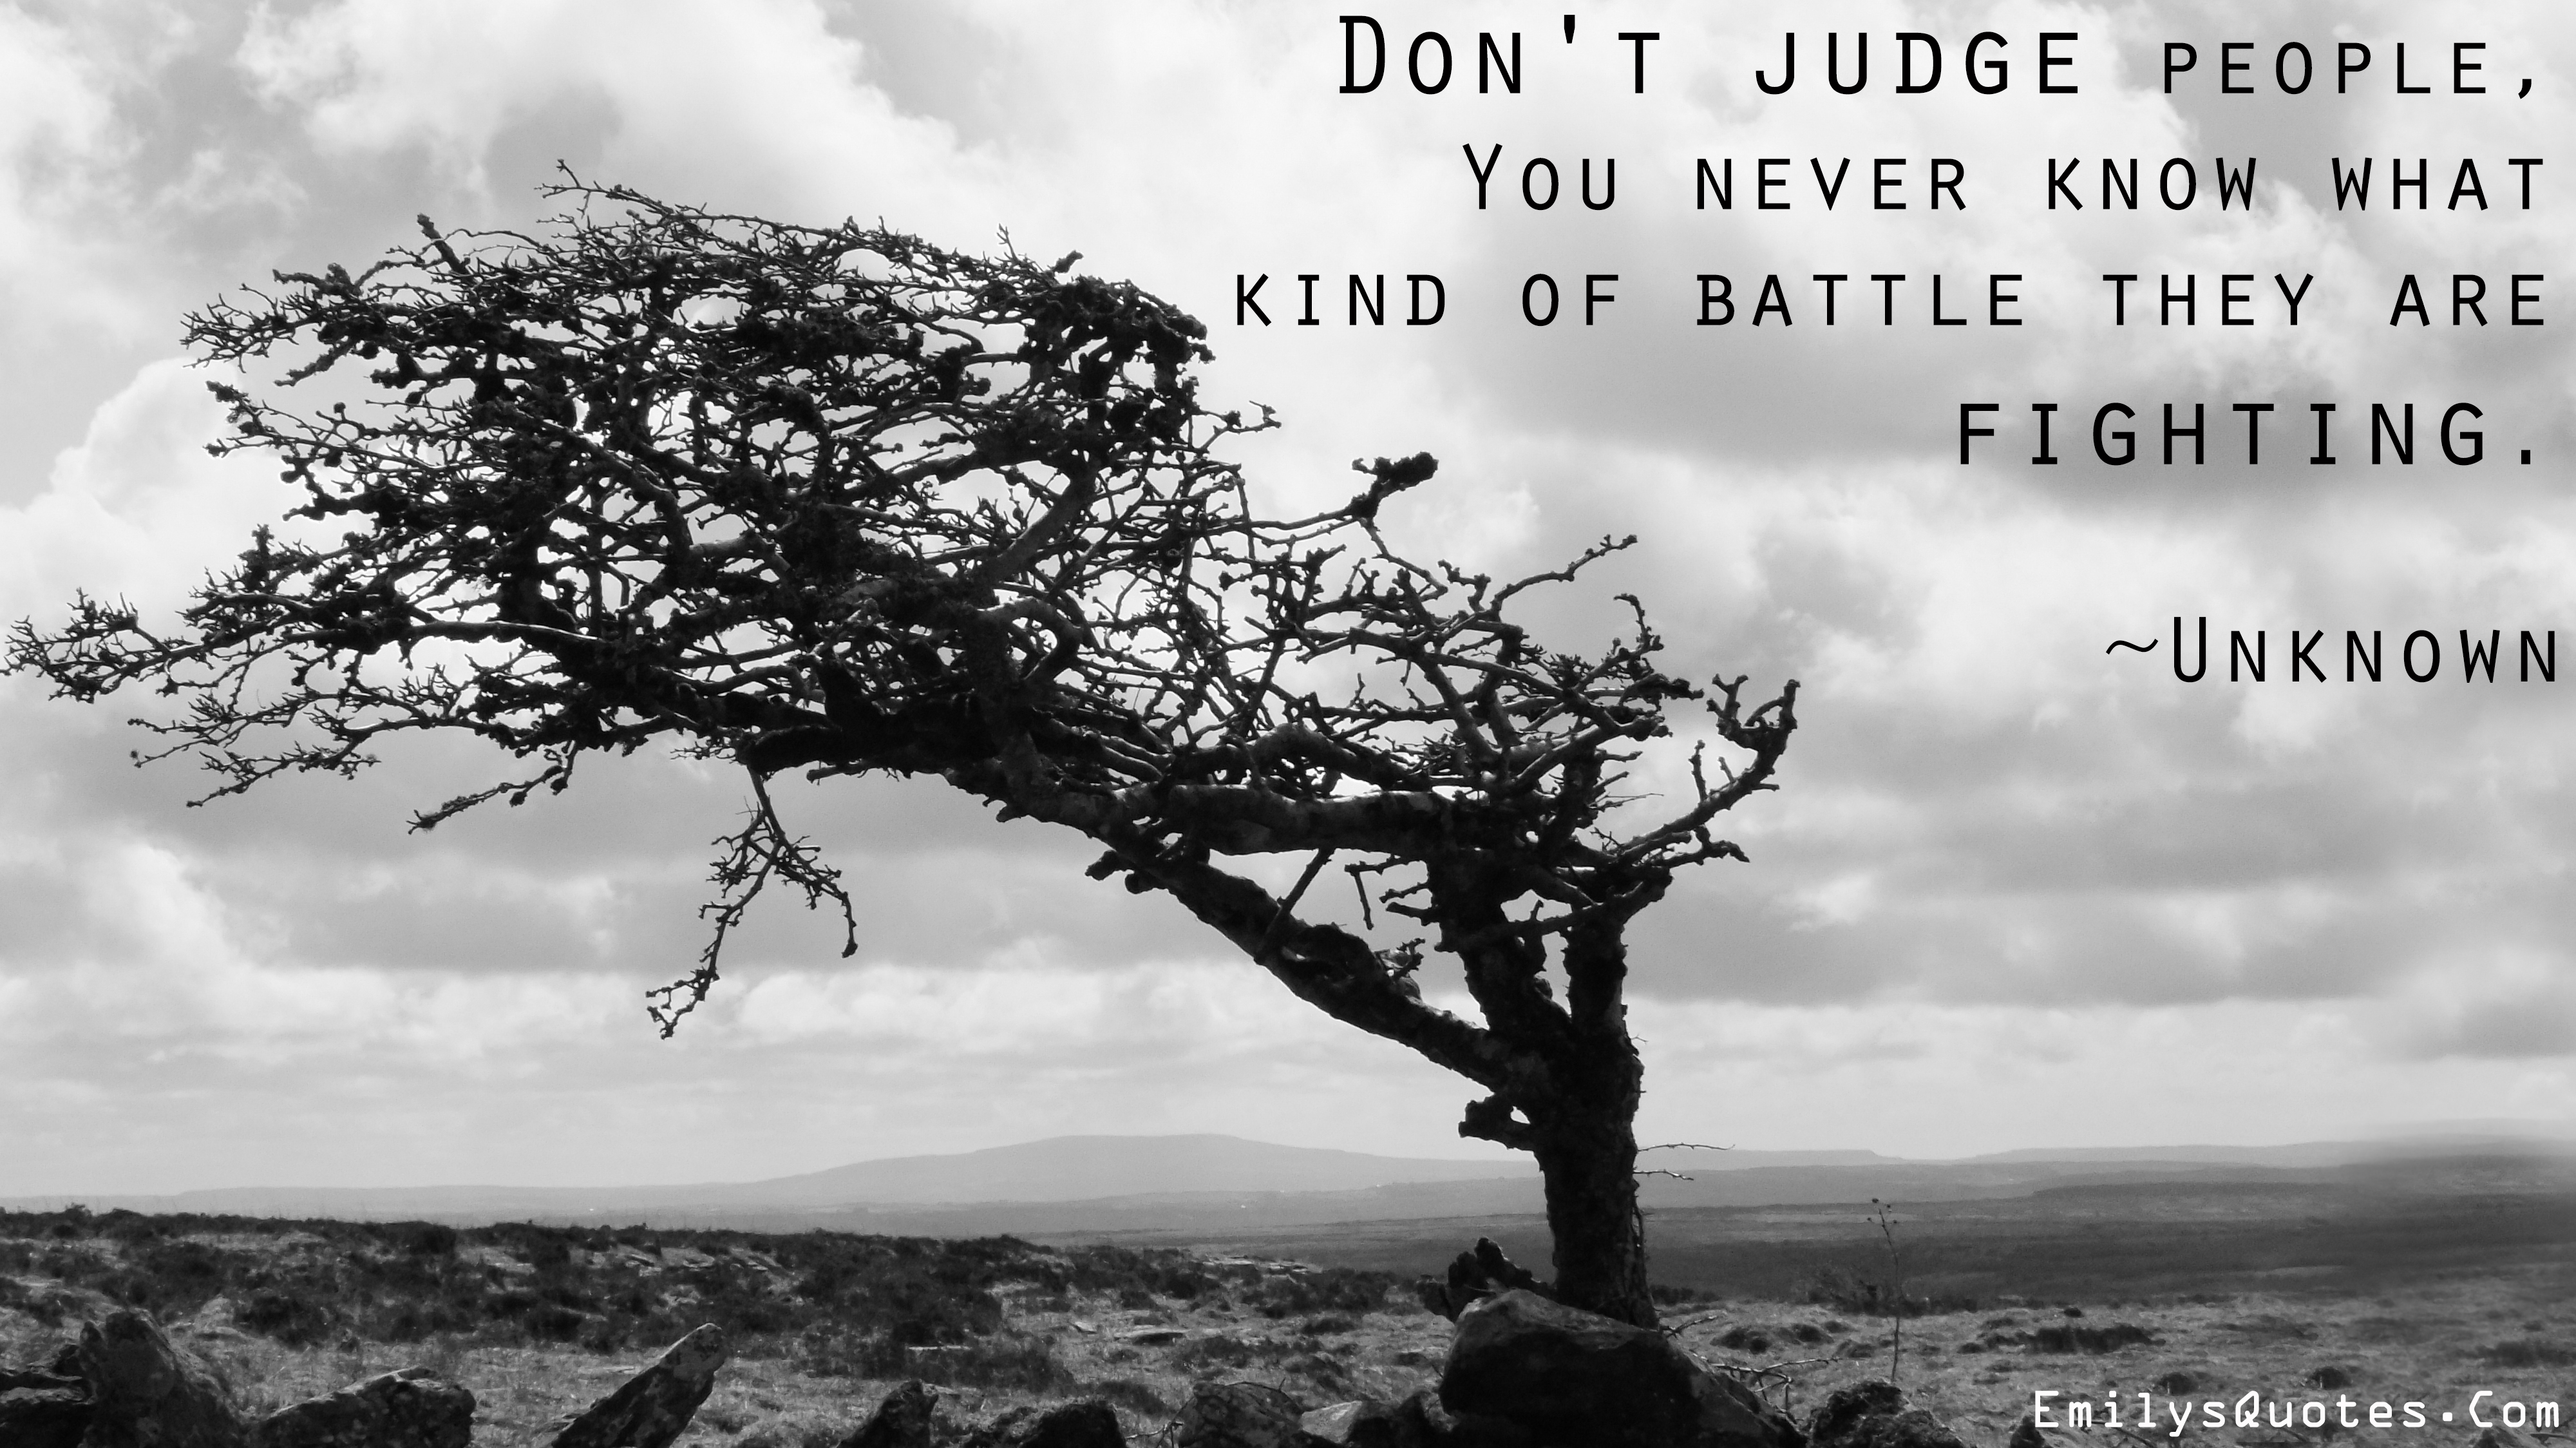 Don’t judge people, you never know what kind of battle they are fighting